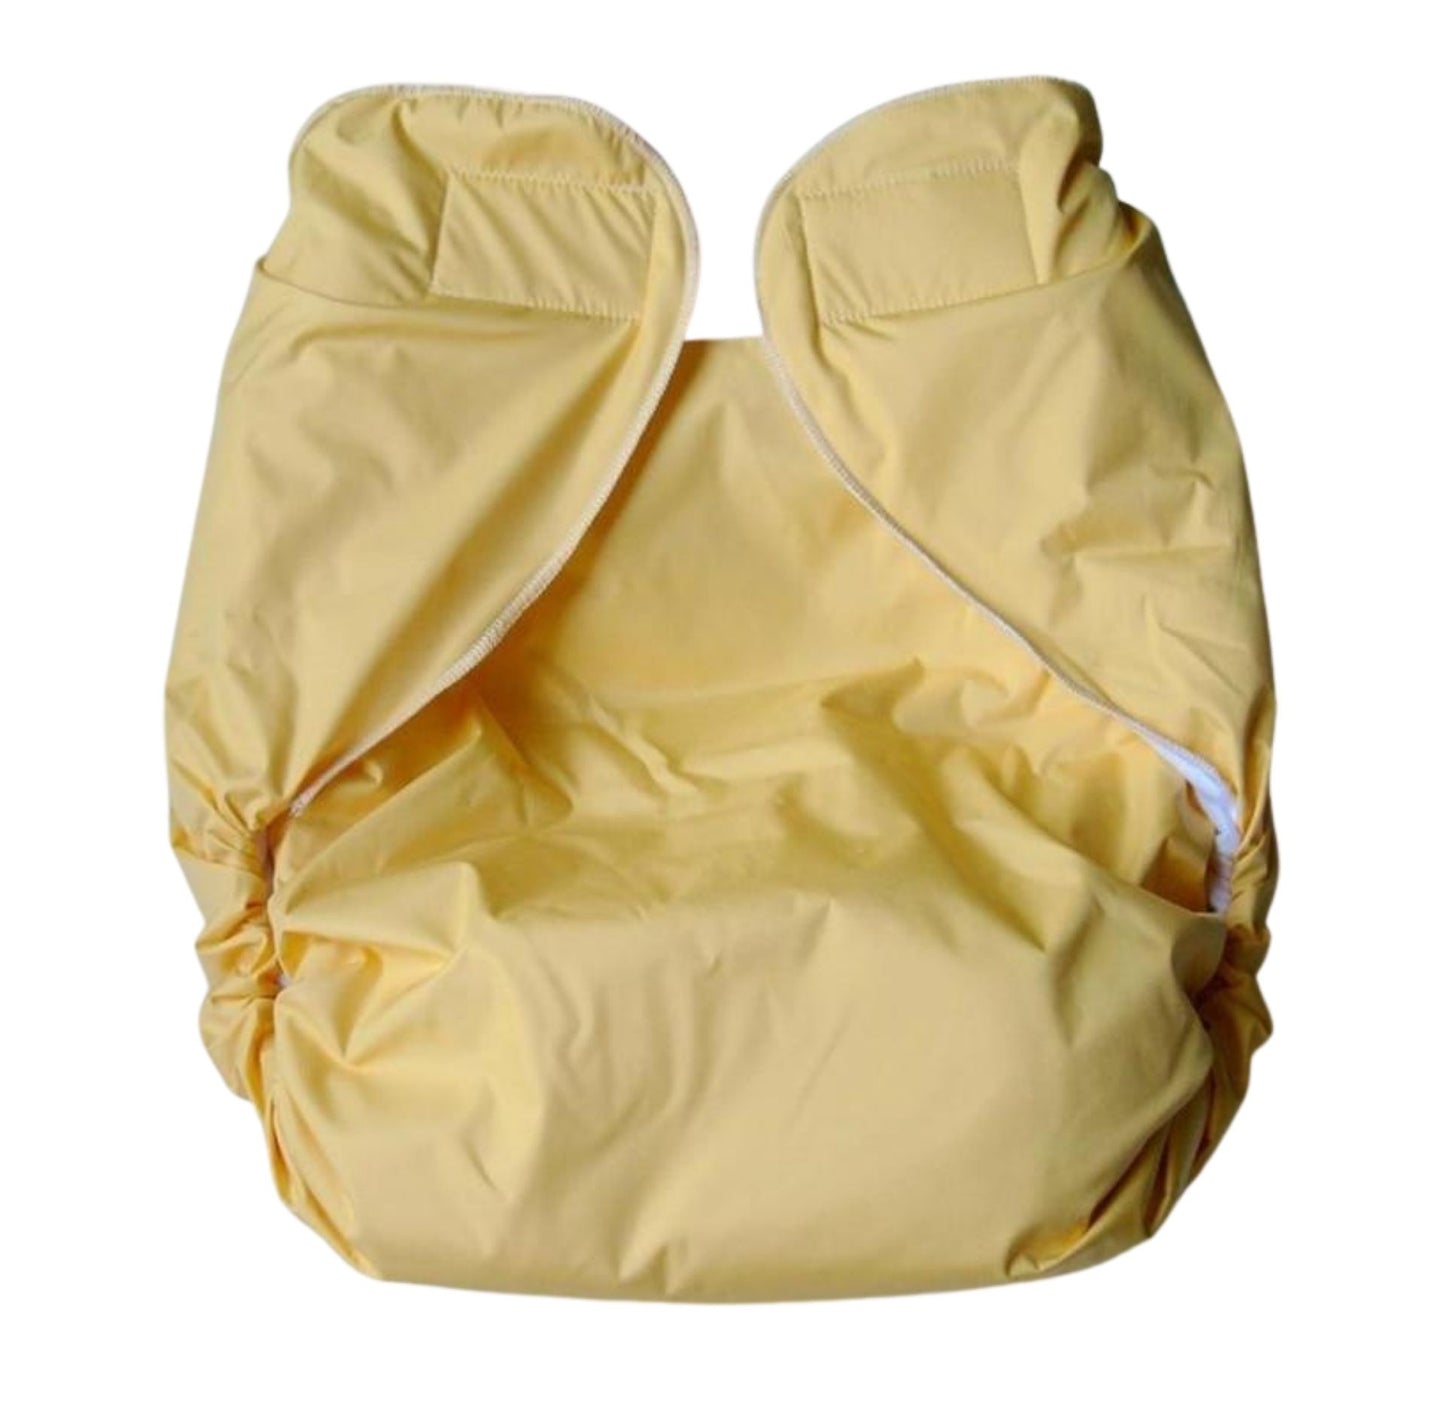 ABDL Yellow Diaper Size L – ABDL Diapers